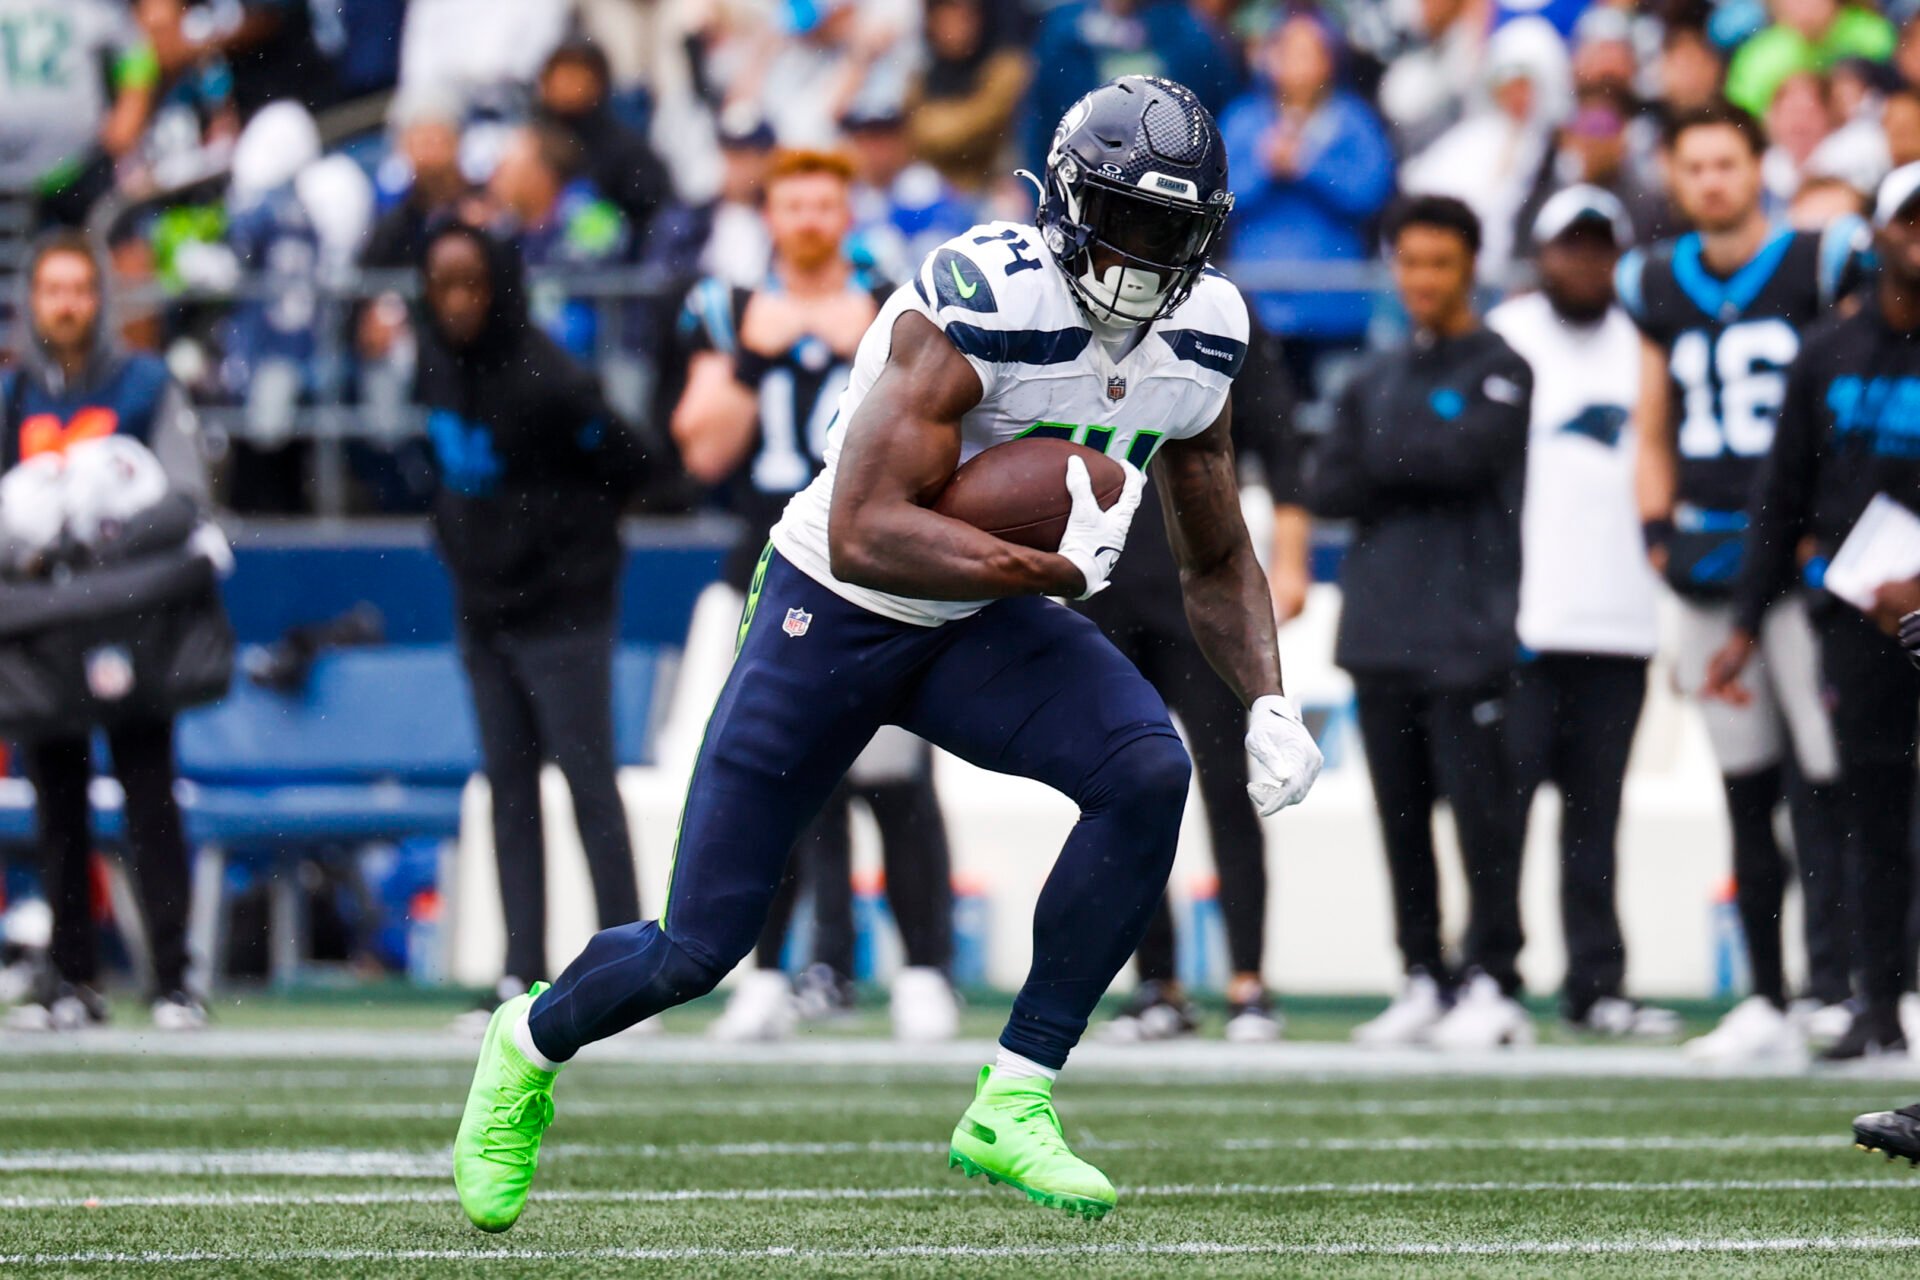 Seattle Seahawks wide receiver DK Metcalf (14) runs for yards after the catch against the Carolina Panthers during the second quarter at Lumen Field.